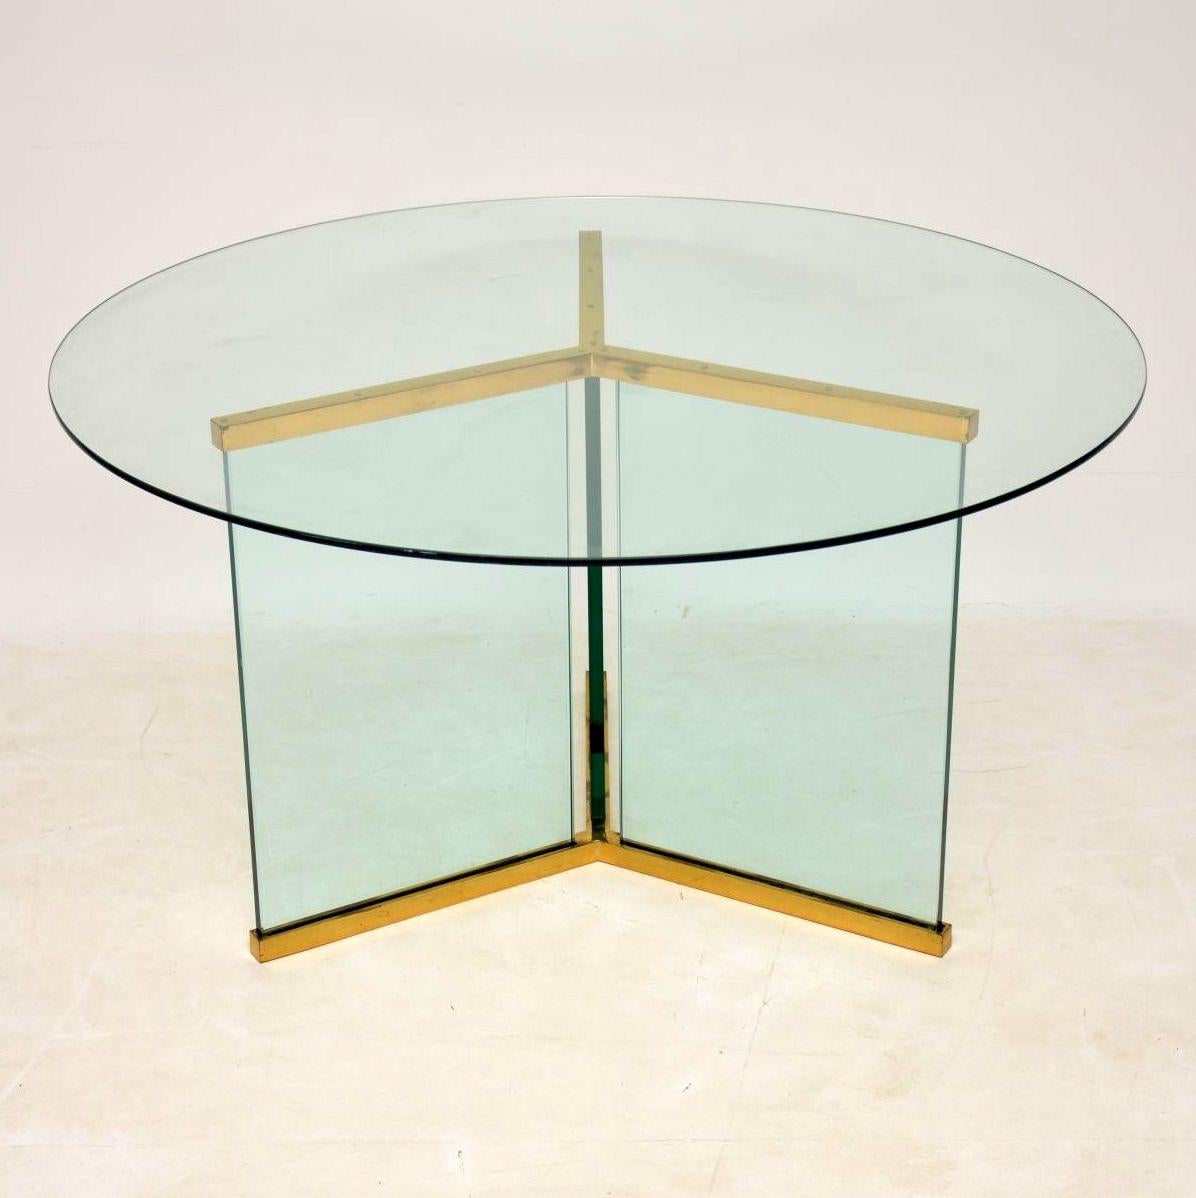 A beautiful and extremely well made vintage dining table, this was designed by Leon Rosen for Pace collection, it was made in the USA during the 1970s. It’s made entirely from glass and brass, the glass on the base is extremely thick and heavy. This